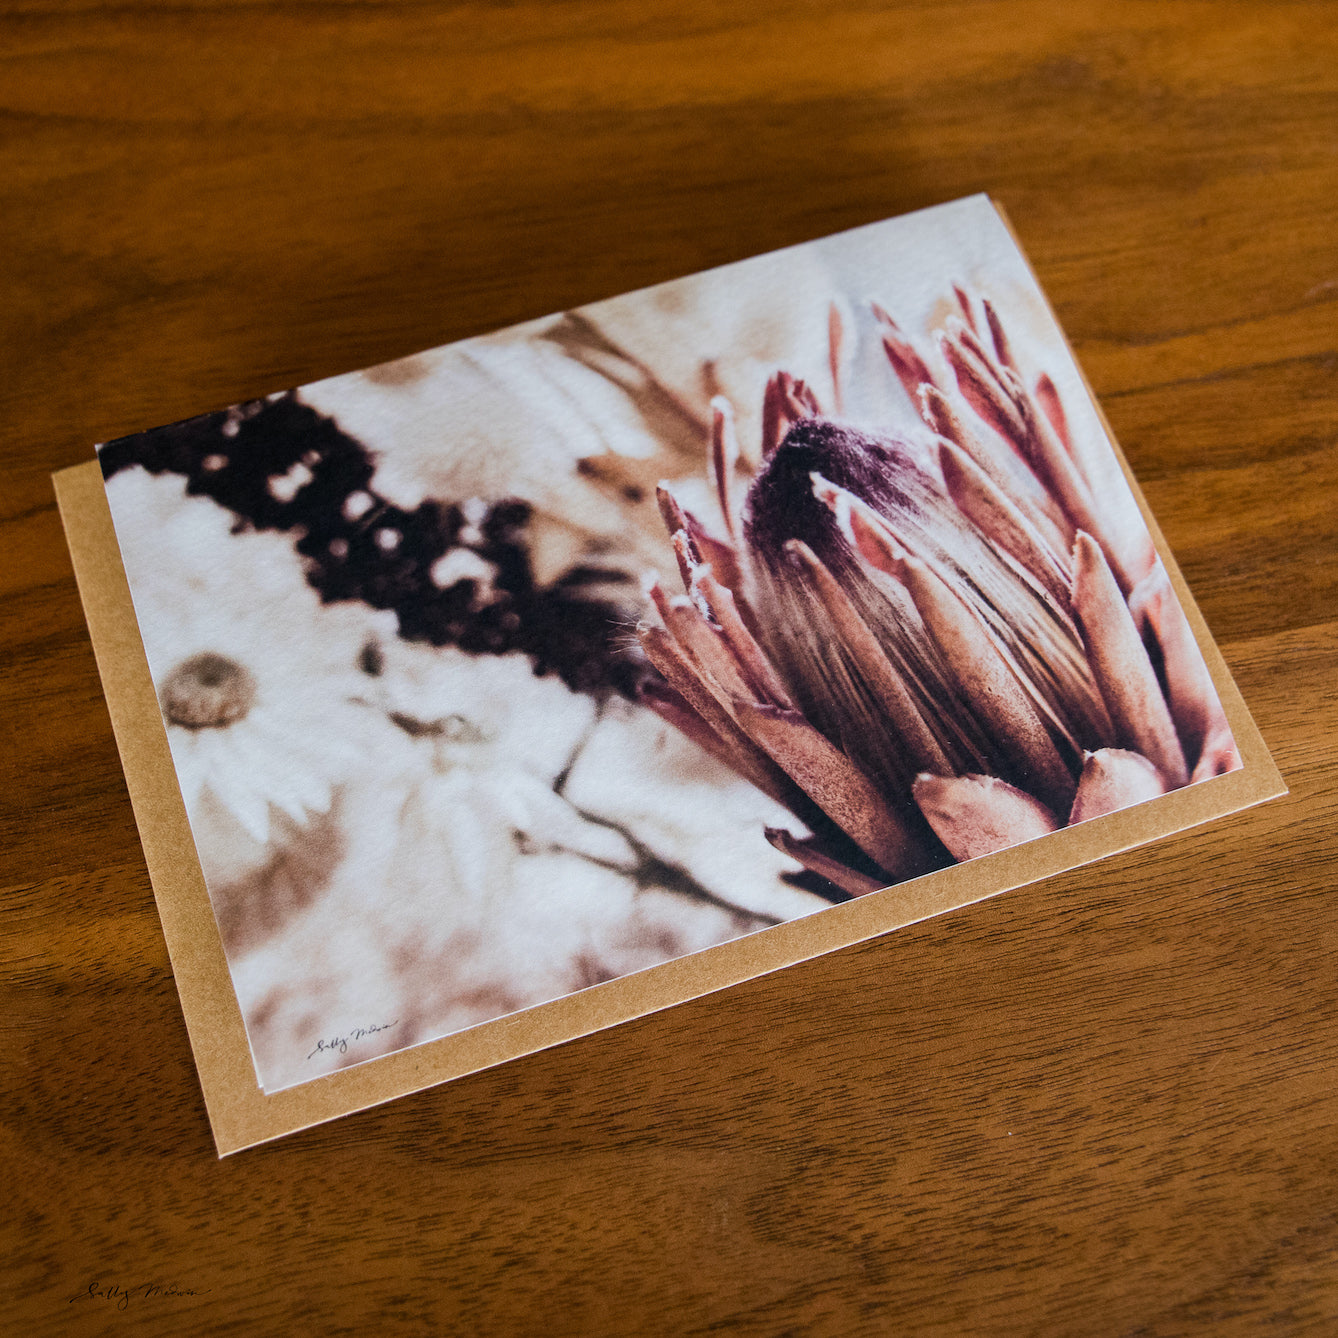 Dried Blooms Card Set